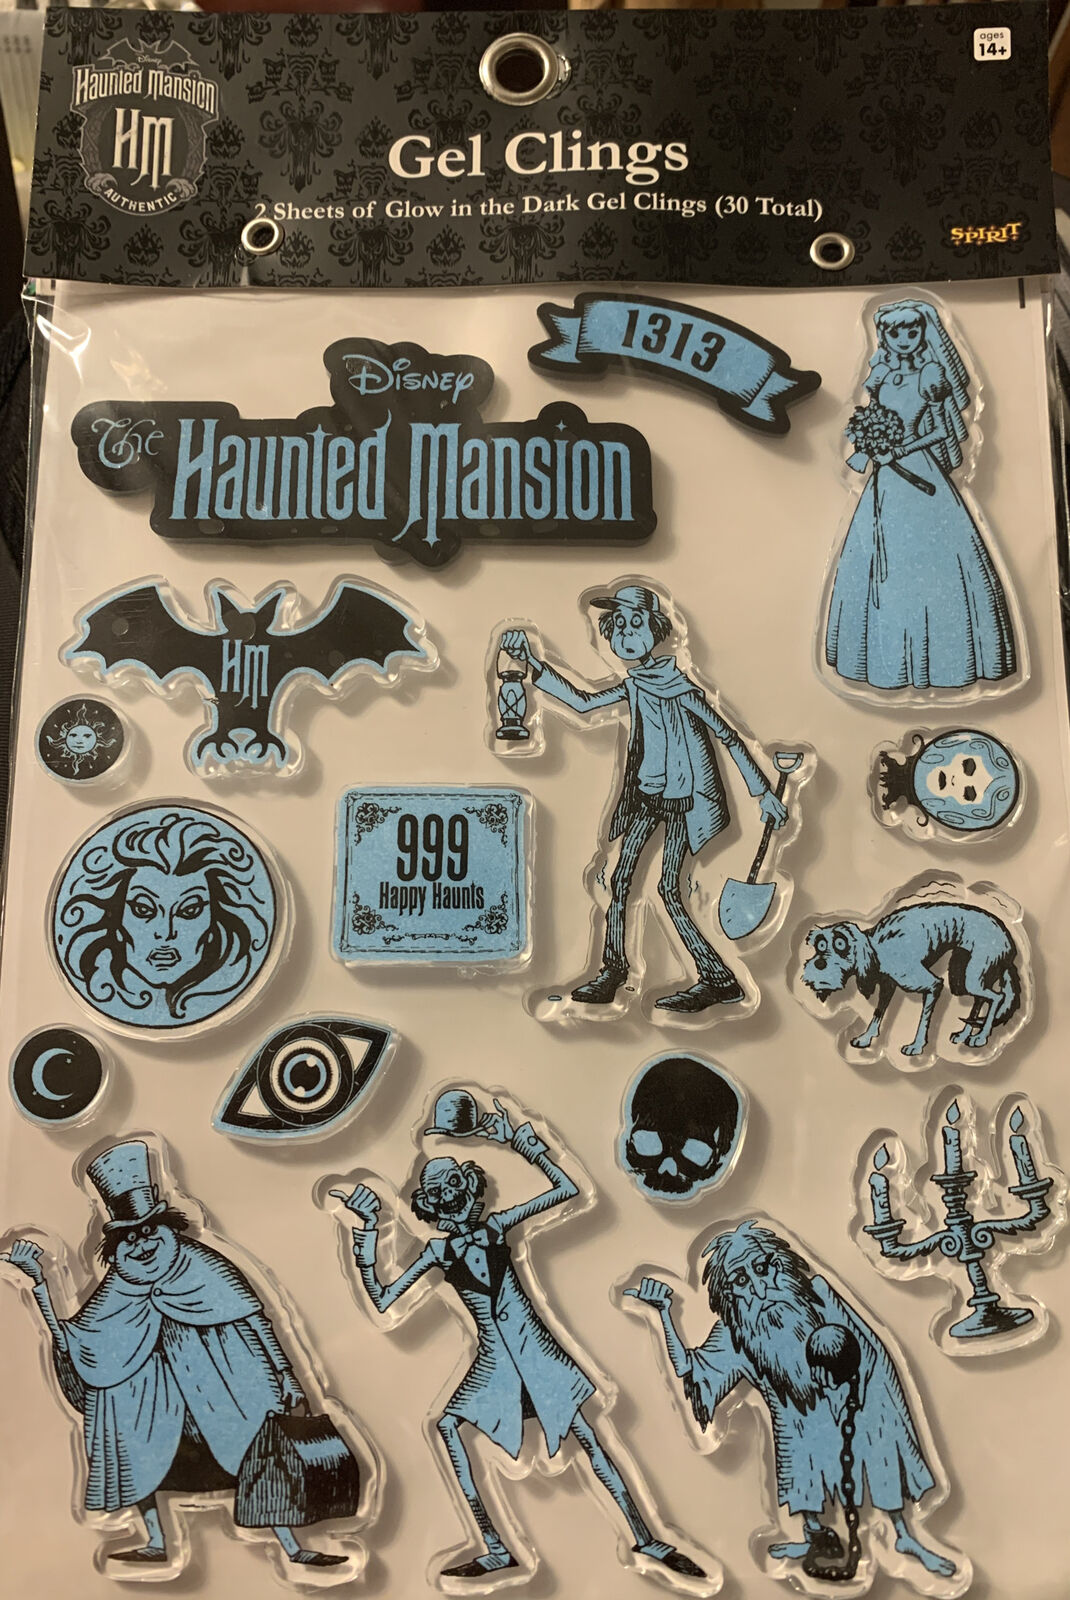 Disney’s Haunted Mansion Gel Clings: 30 Count